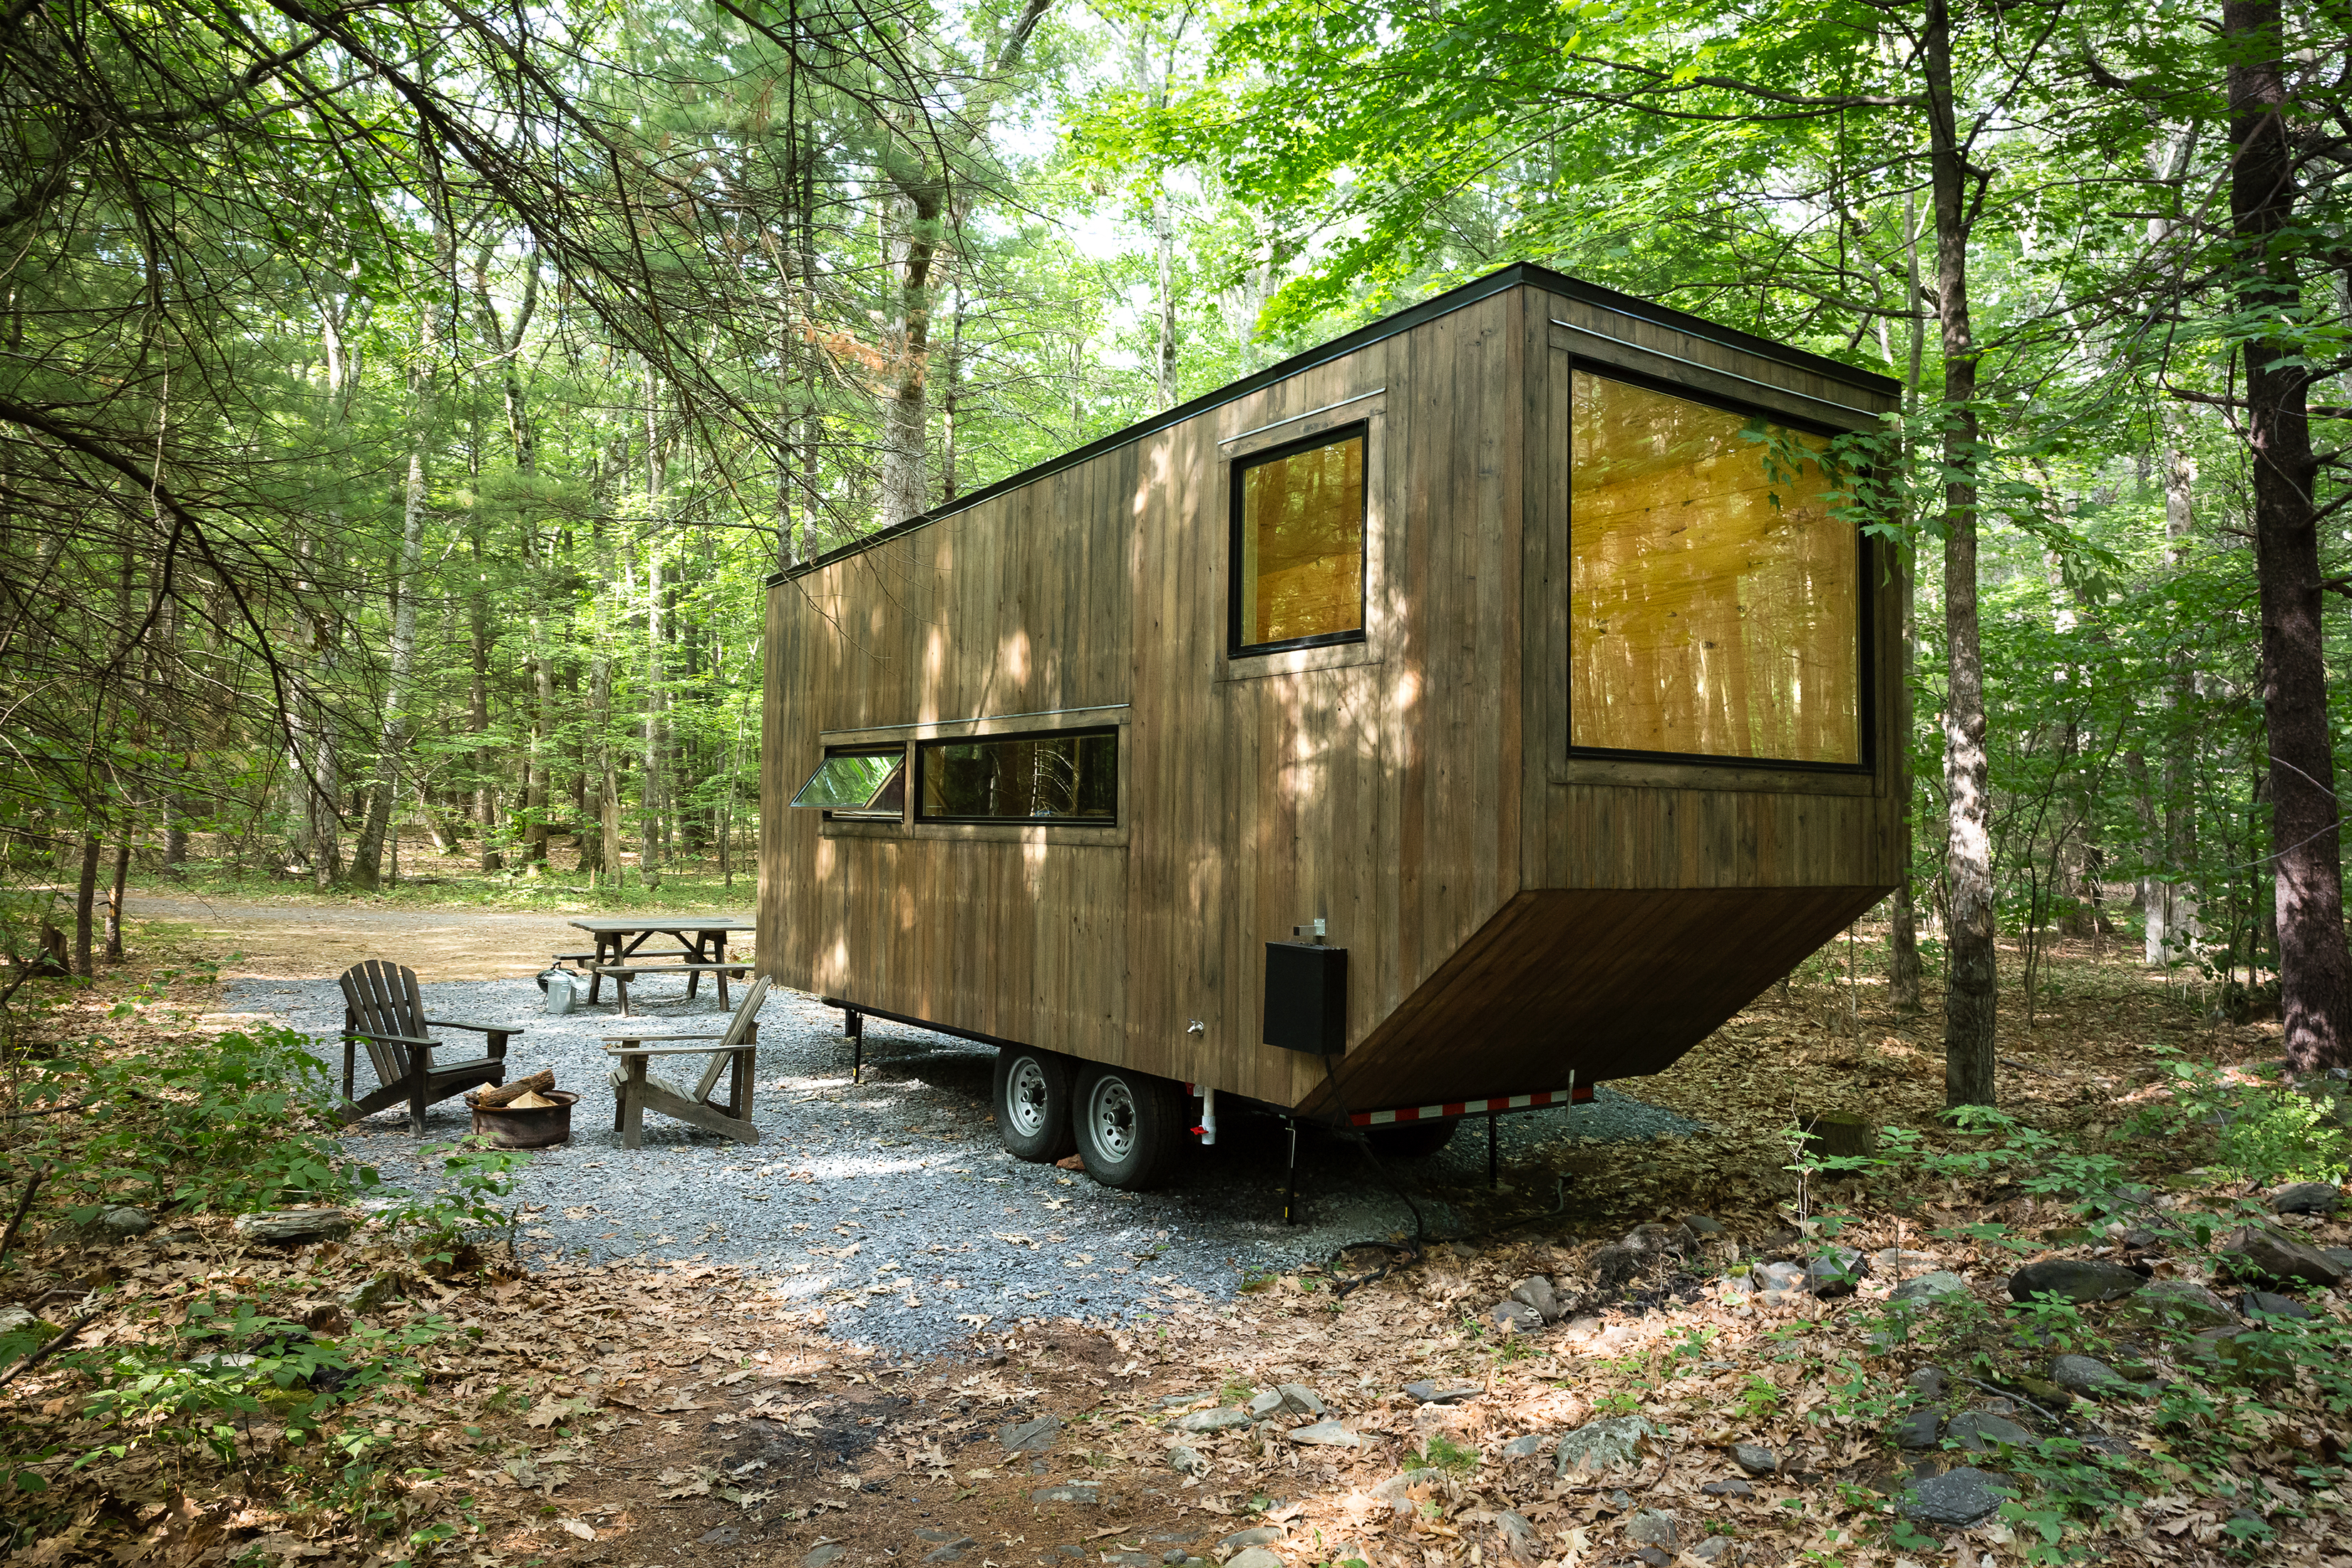 This tiny house in the woods is waiting for you... (Photo Credit: Dylan Engels)